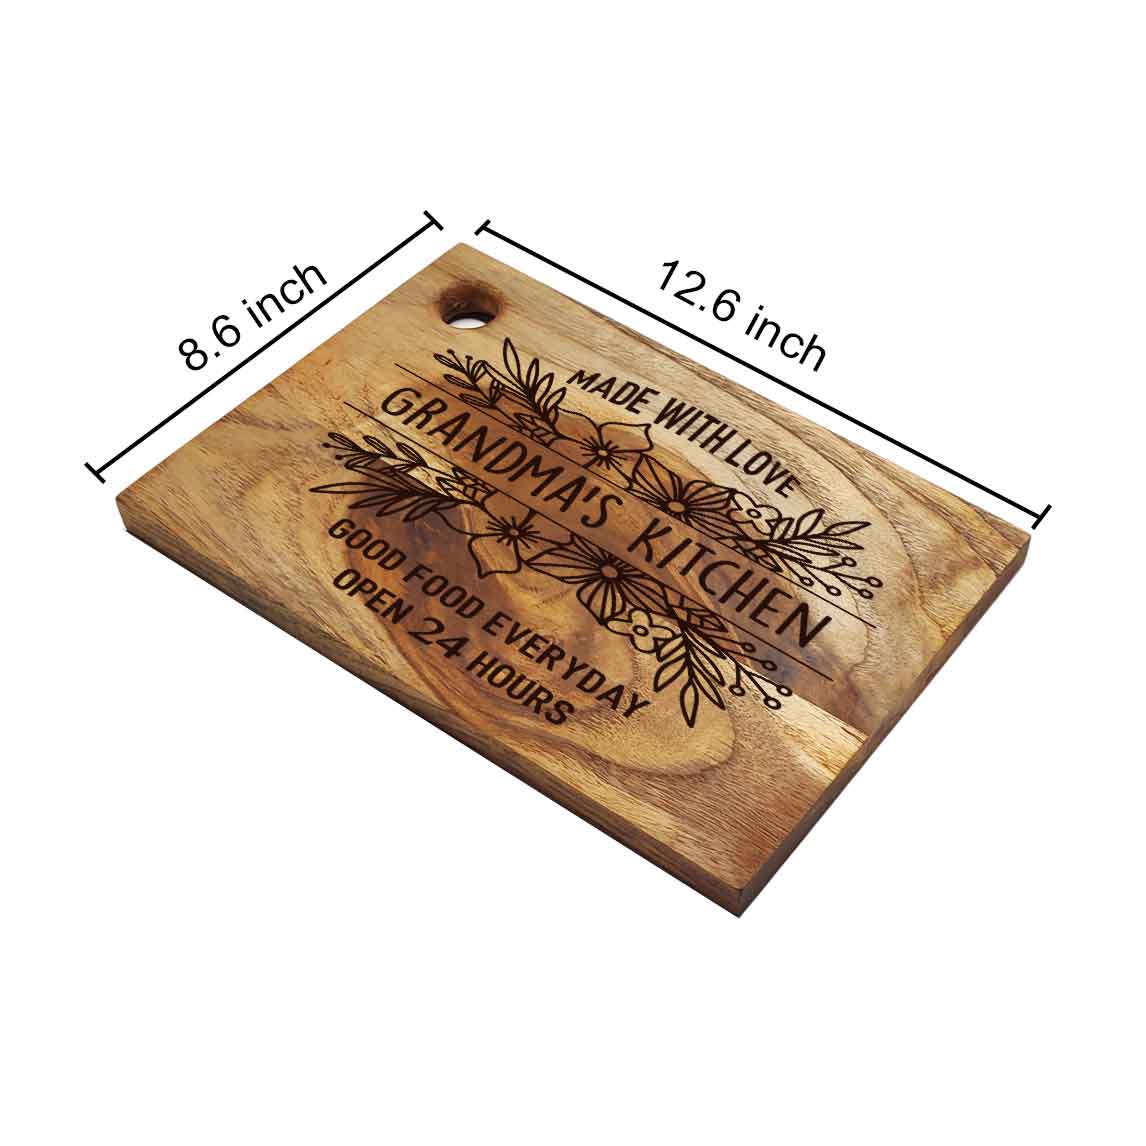 Custom Engraved Cutting Board Wooden Vegetable Chopping Stand Mother Day Gift - Grandma's kitchen